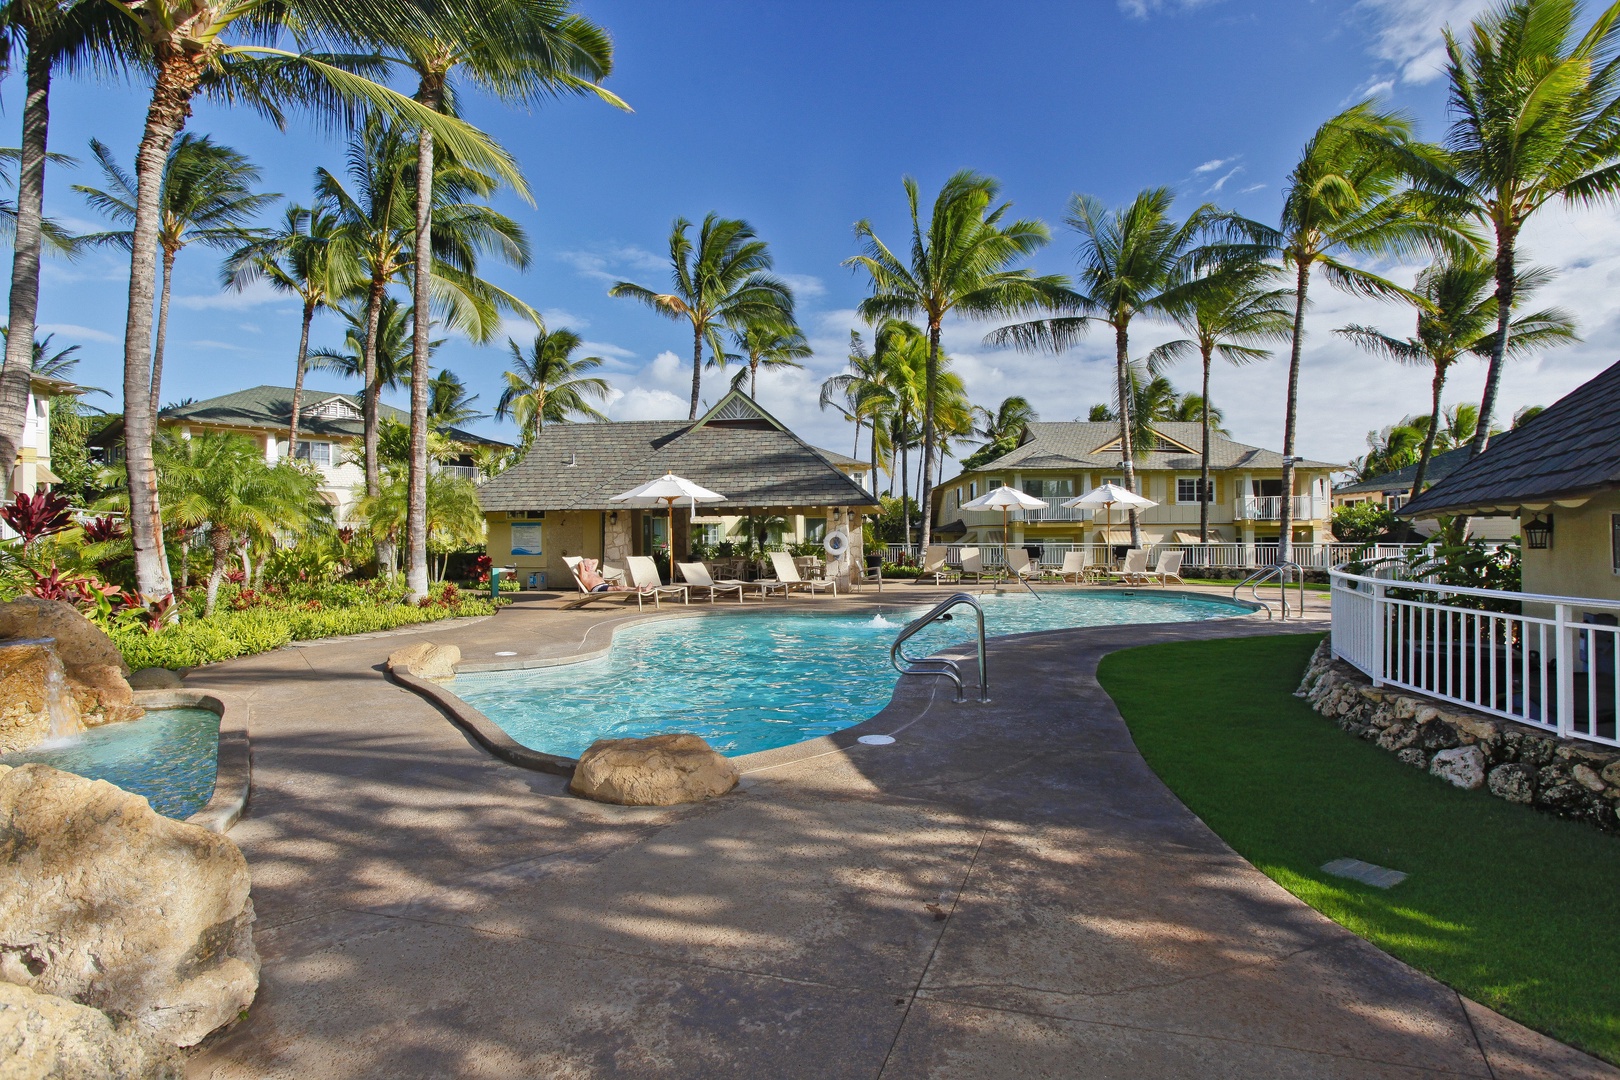 Kapolei Vacation Rentals, Kai Lani 20C - Take a dip in the crystal blue waters of the pool.